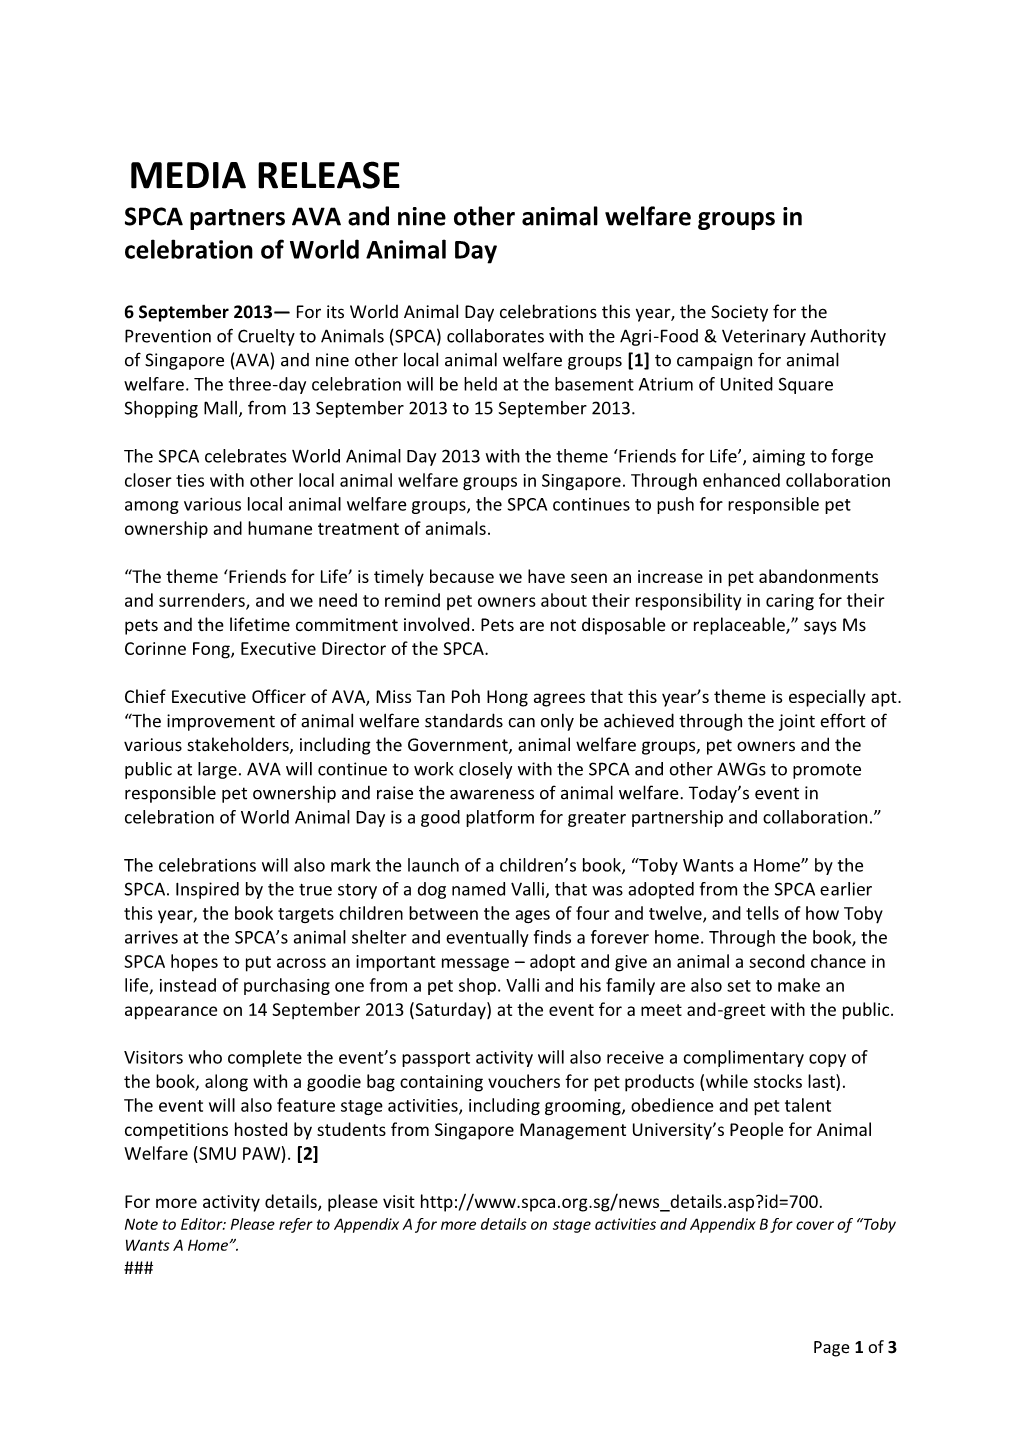 MEDIA RELEASE SPCA Partners AVA and Nine Other Animal Welfare Groups in Celebration of World Animal Day